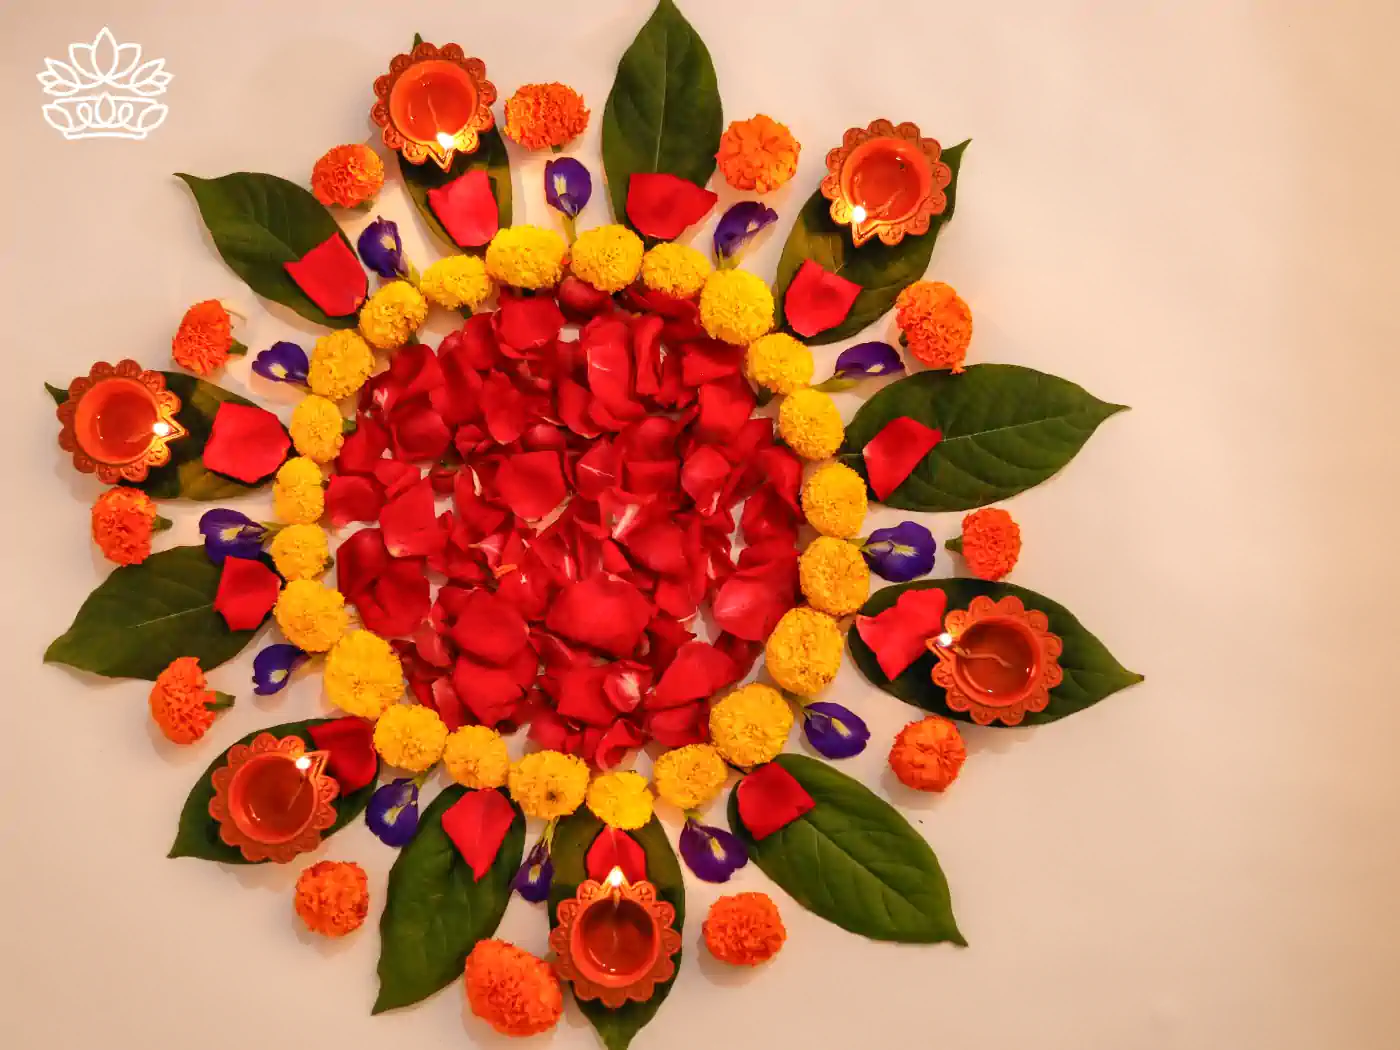 An overhead view of a meticulously arranged Diwali rangoli featuring red rose petals, purple petals, yellow and orange marigolds, interspersed with green leaves and lit clay lamps. Fabulous Flowers and Gifts - Diwali Flowers. Delivered with Heart.